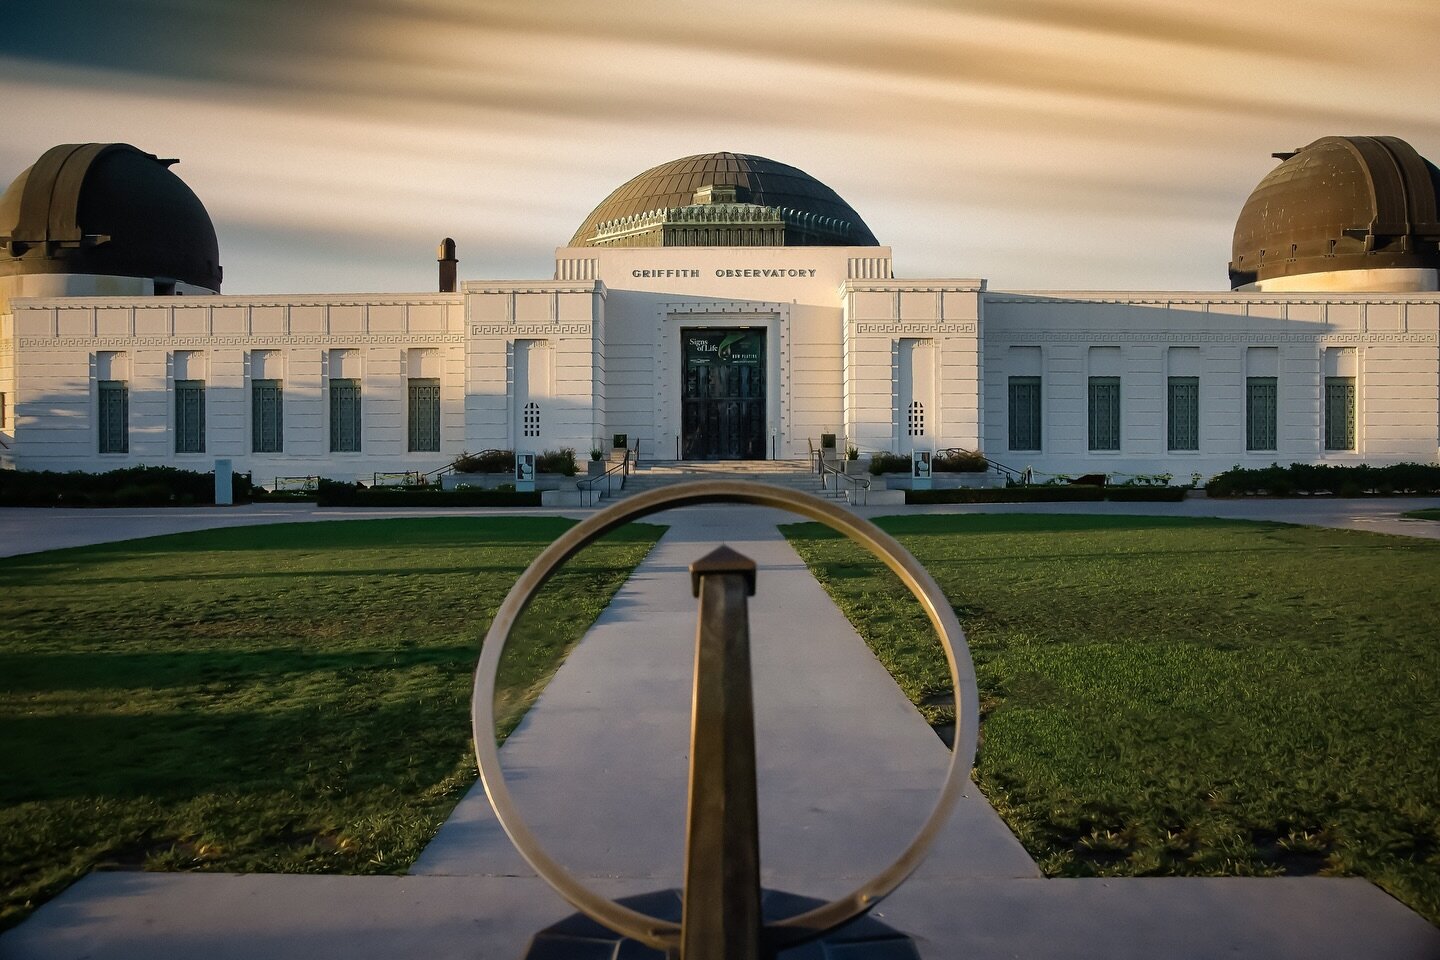 Capturing the celestial beauty at Griffith Observatory &ndash; where stars meet skyline. Share your favorite stargazing memory below and let&rsquo;s spark a cosmic conversation. 🚀 

#GriffithObservatory #StarryNights #CityOfAngels #losangeles #edits